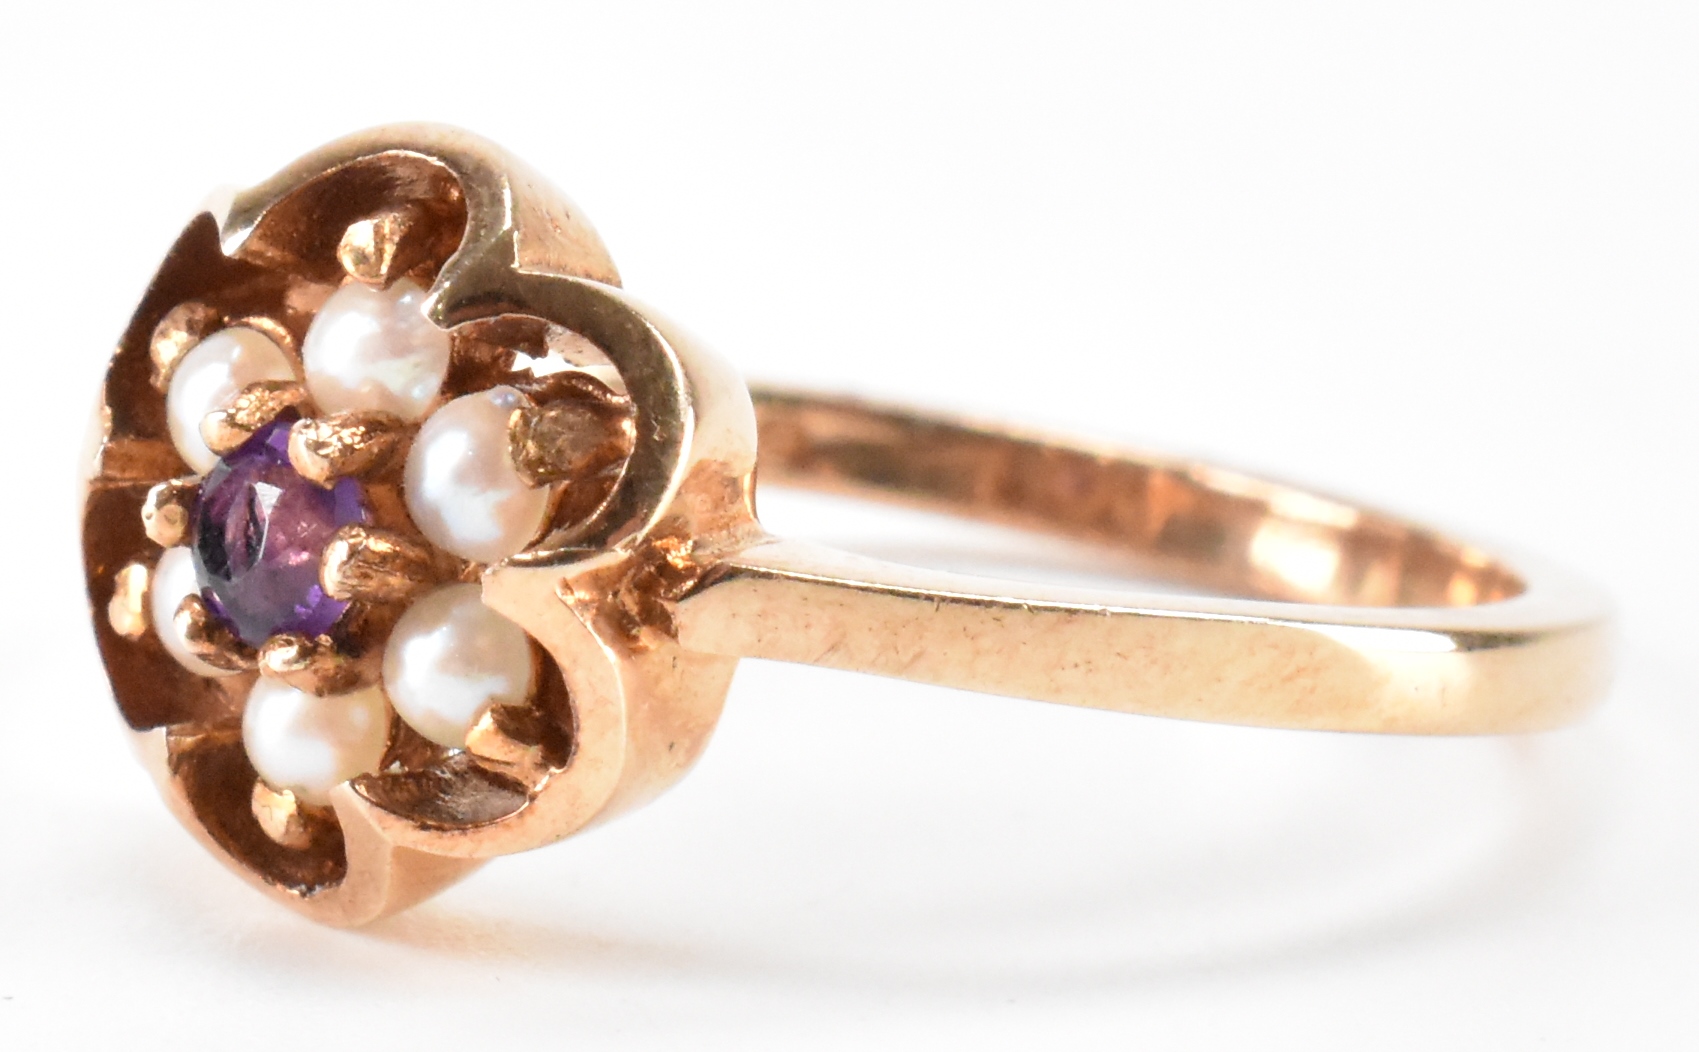 HALLMAKRED 9CT GOLD AMETHYST & SEED PEARL RING - Image 6 of 6